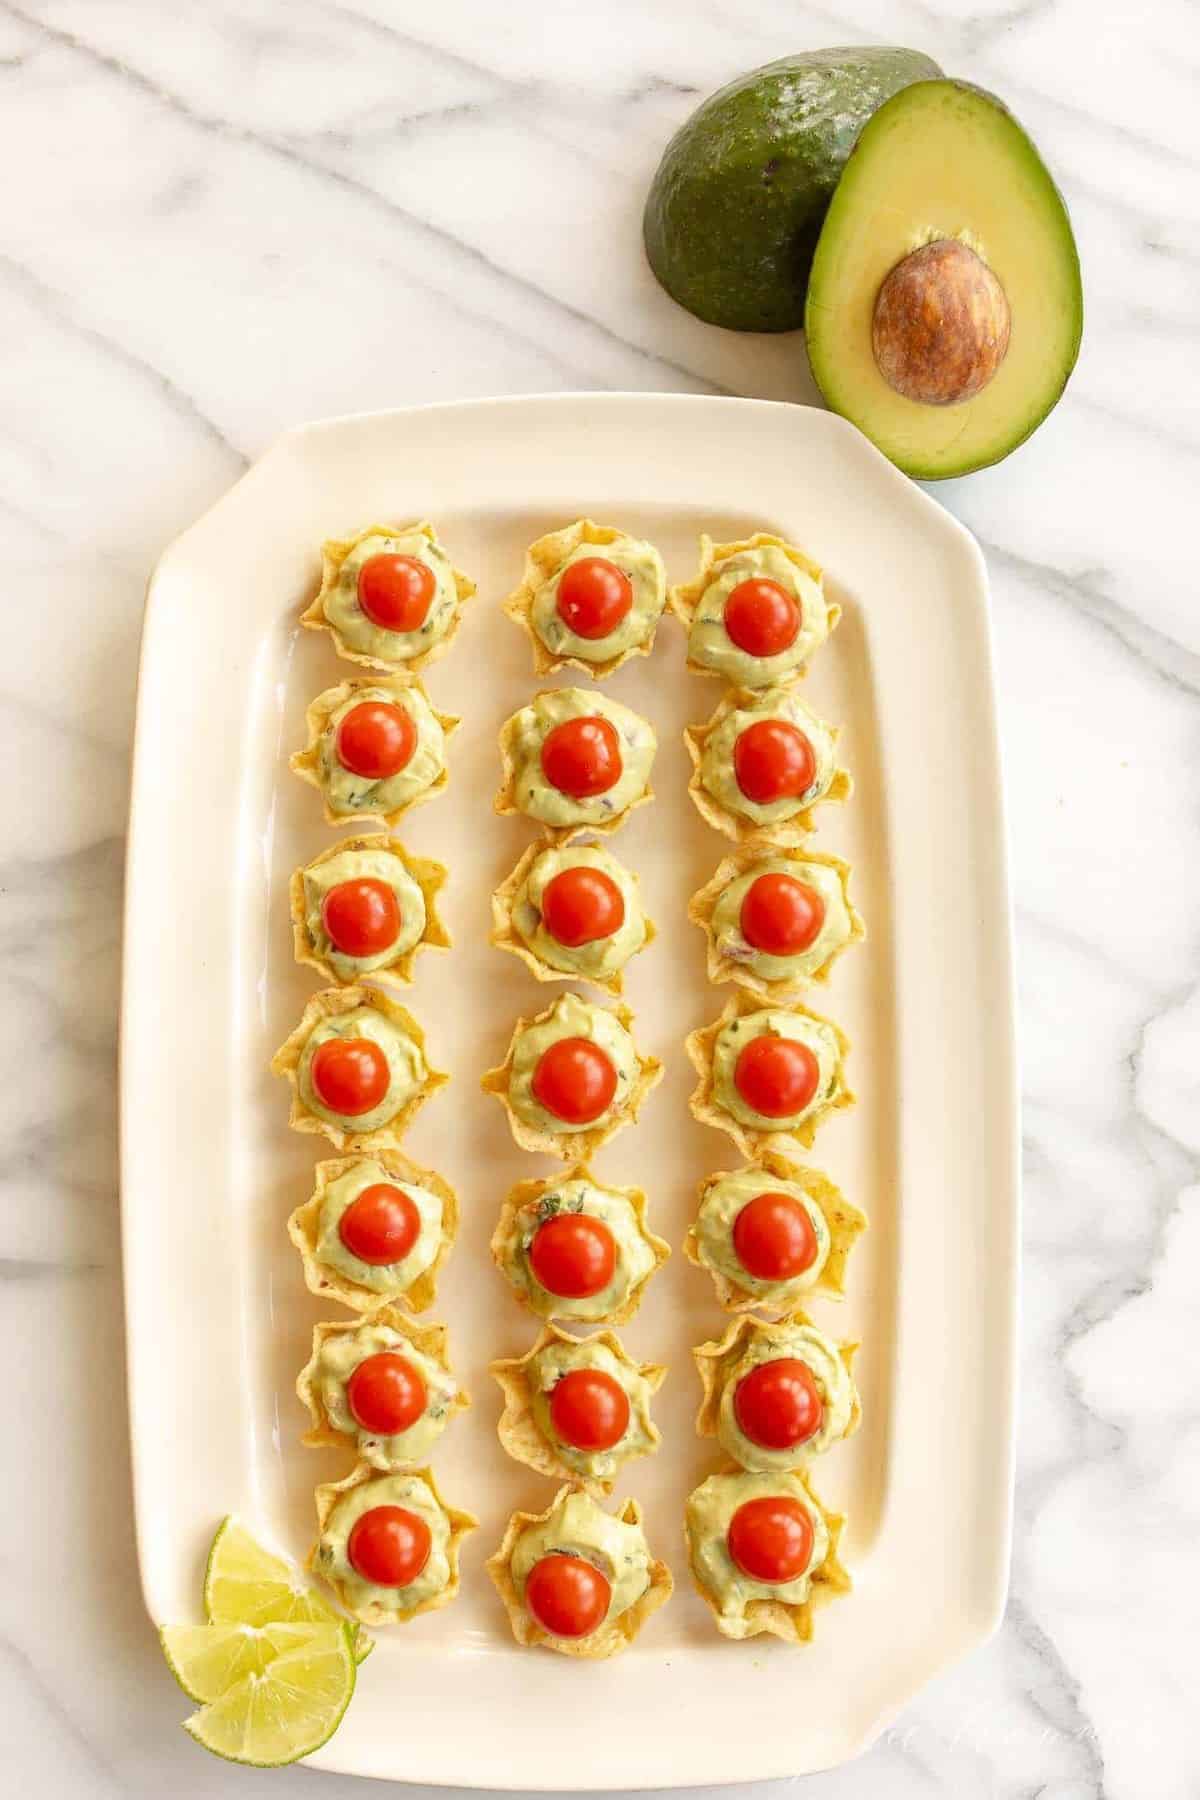 A platter filled with chips, served as guacamole bites, topped with a slice of cherry tomato, avocado to the side.